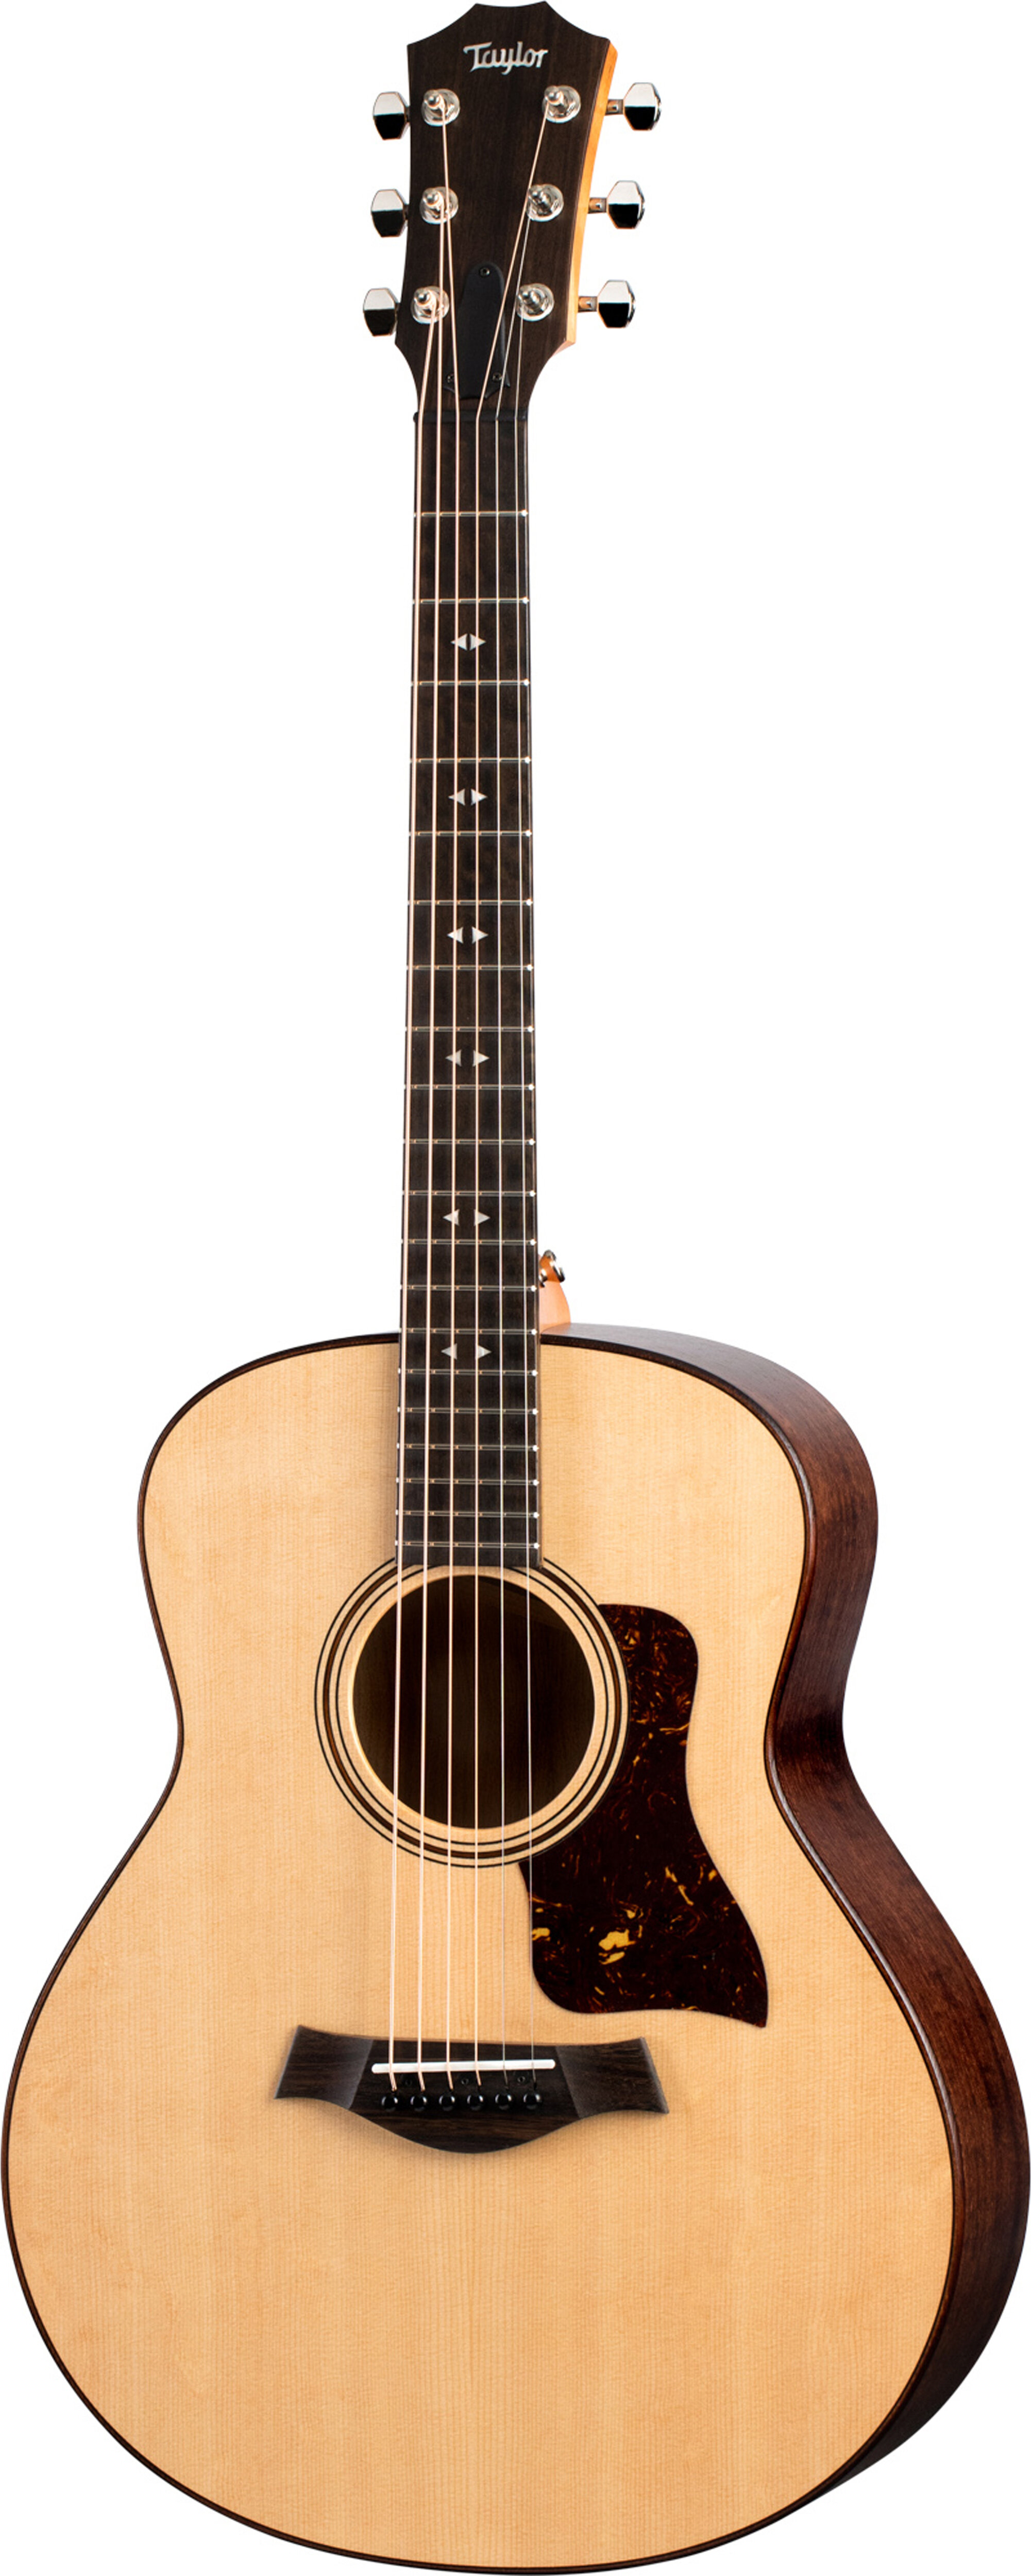 Taylor Grand Theater Urban Ash Acoustic with Case -  Taylor Guitars, GT